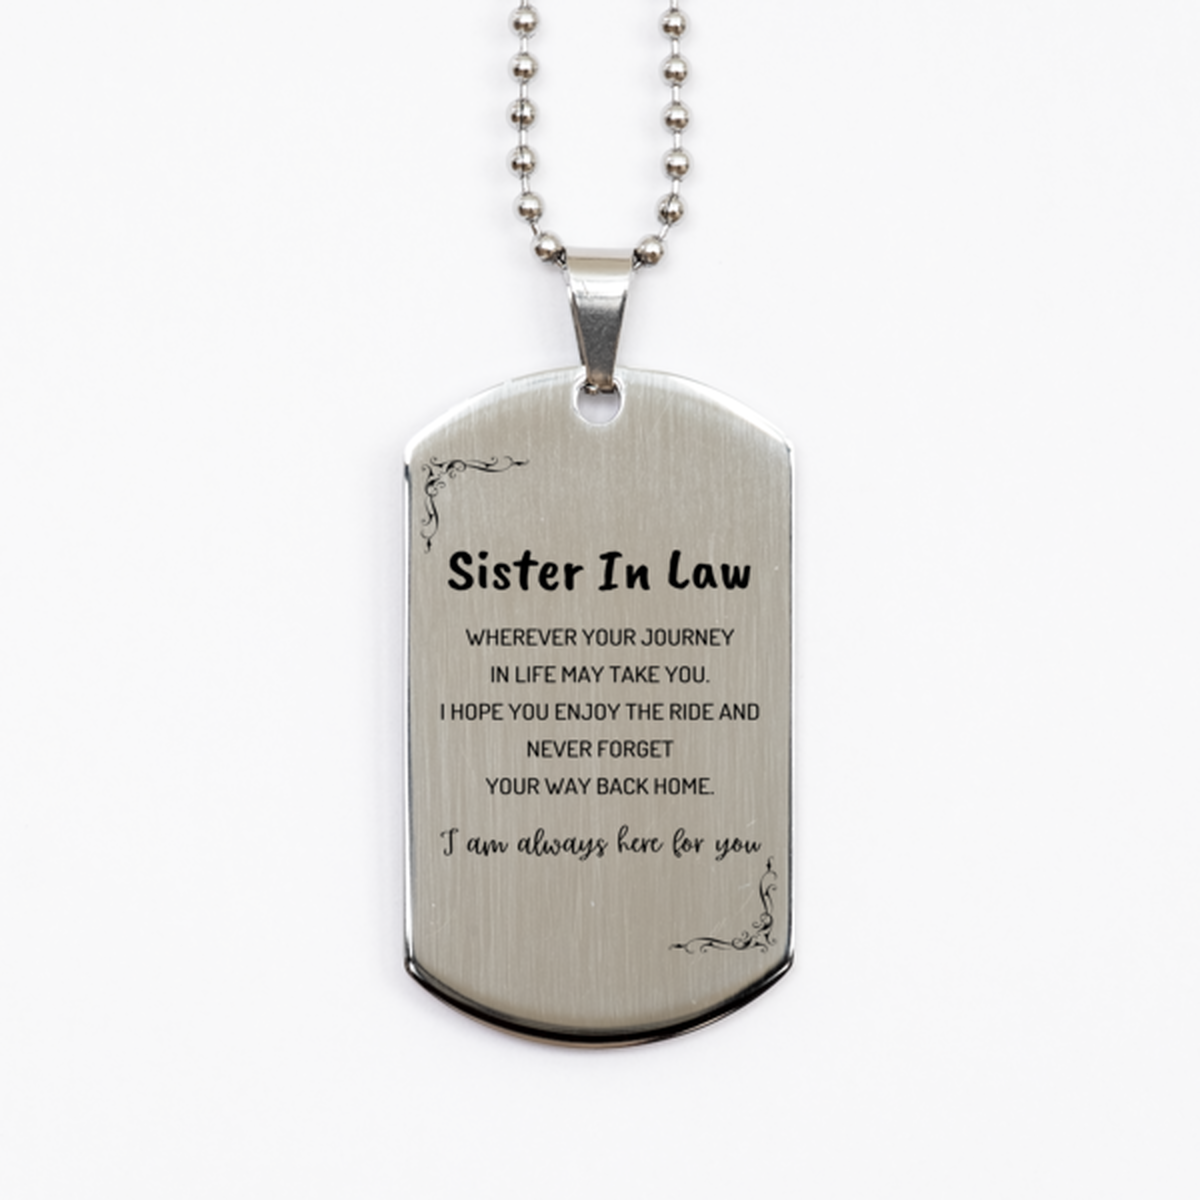 Sister In Law wherever your journey in life may take you, I am always here for you Sister In Law Silver Dog Tag, Awesome Christmas Gifts For Sister In Law, Sister In Law Birthday Gifts for Men Women Family Loved One